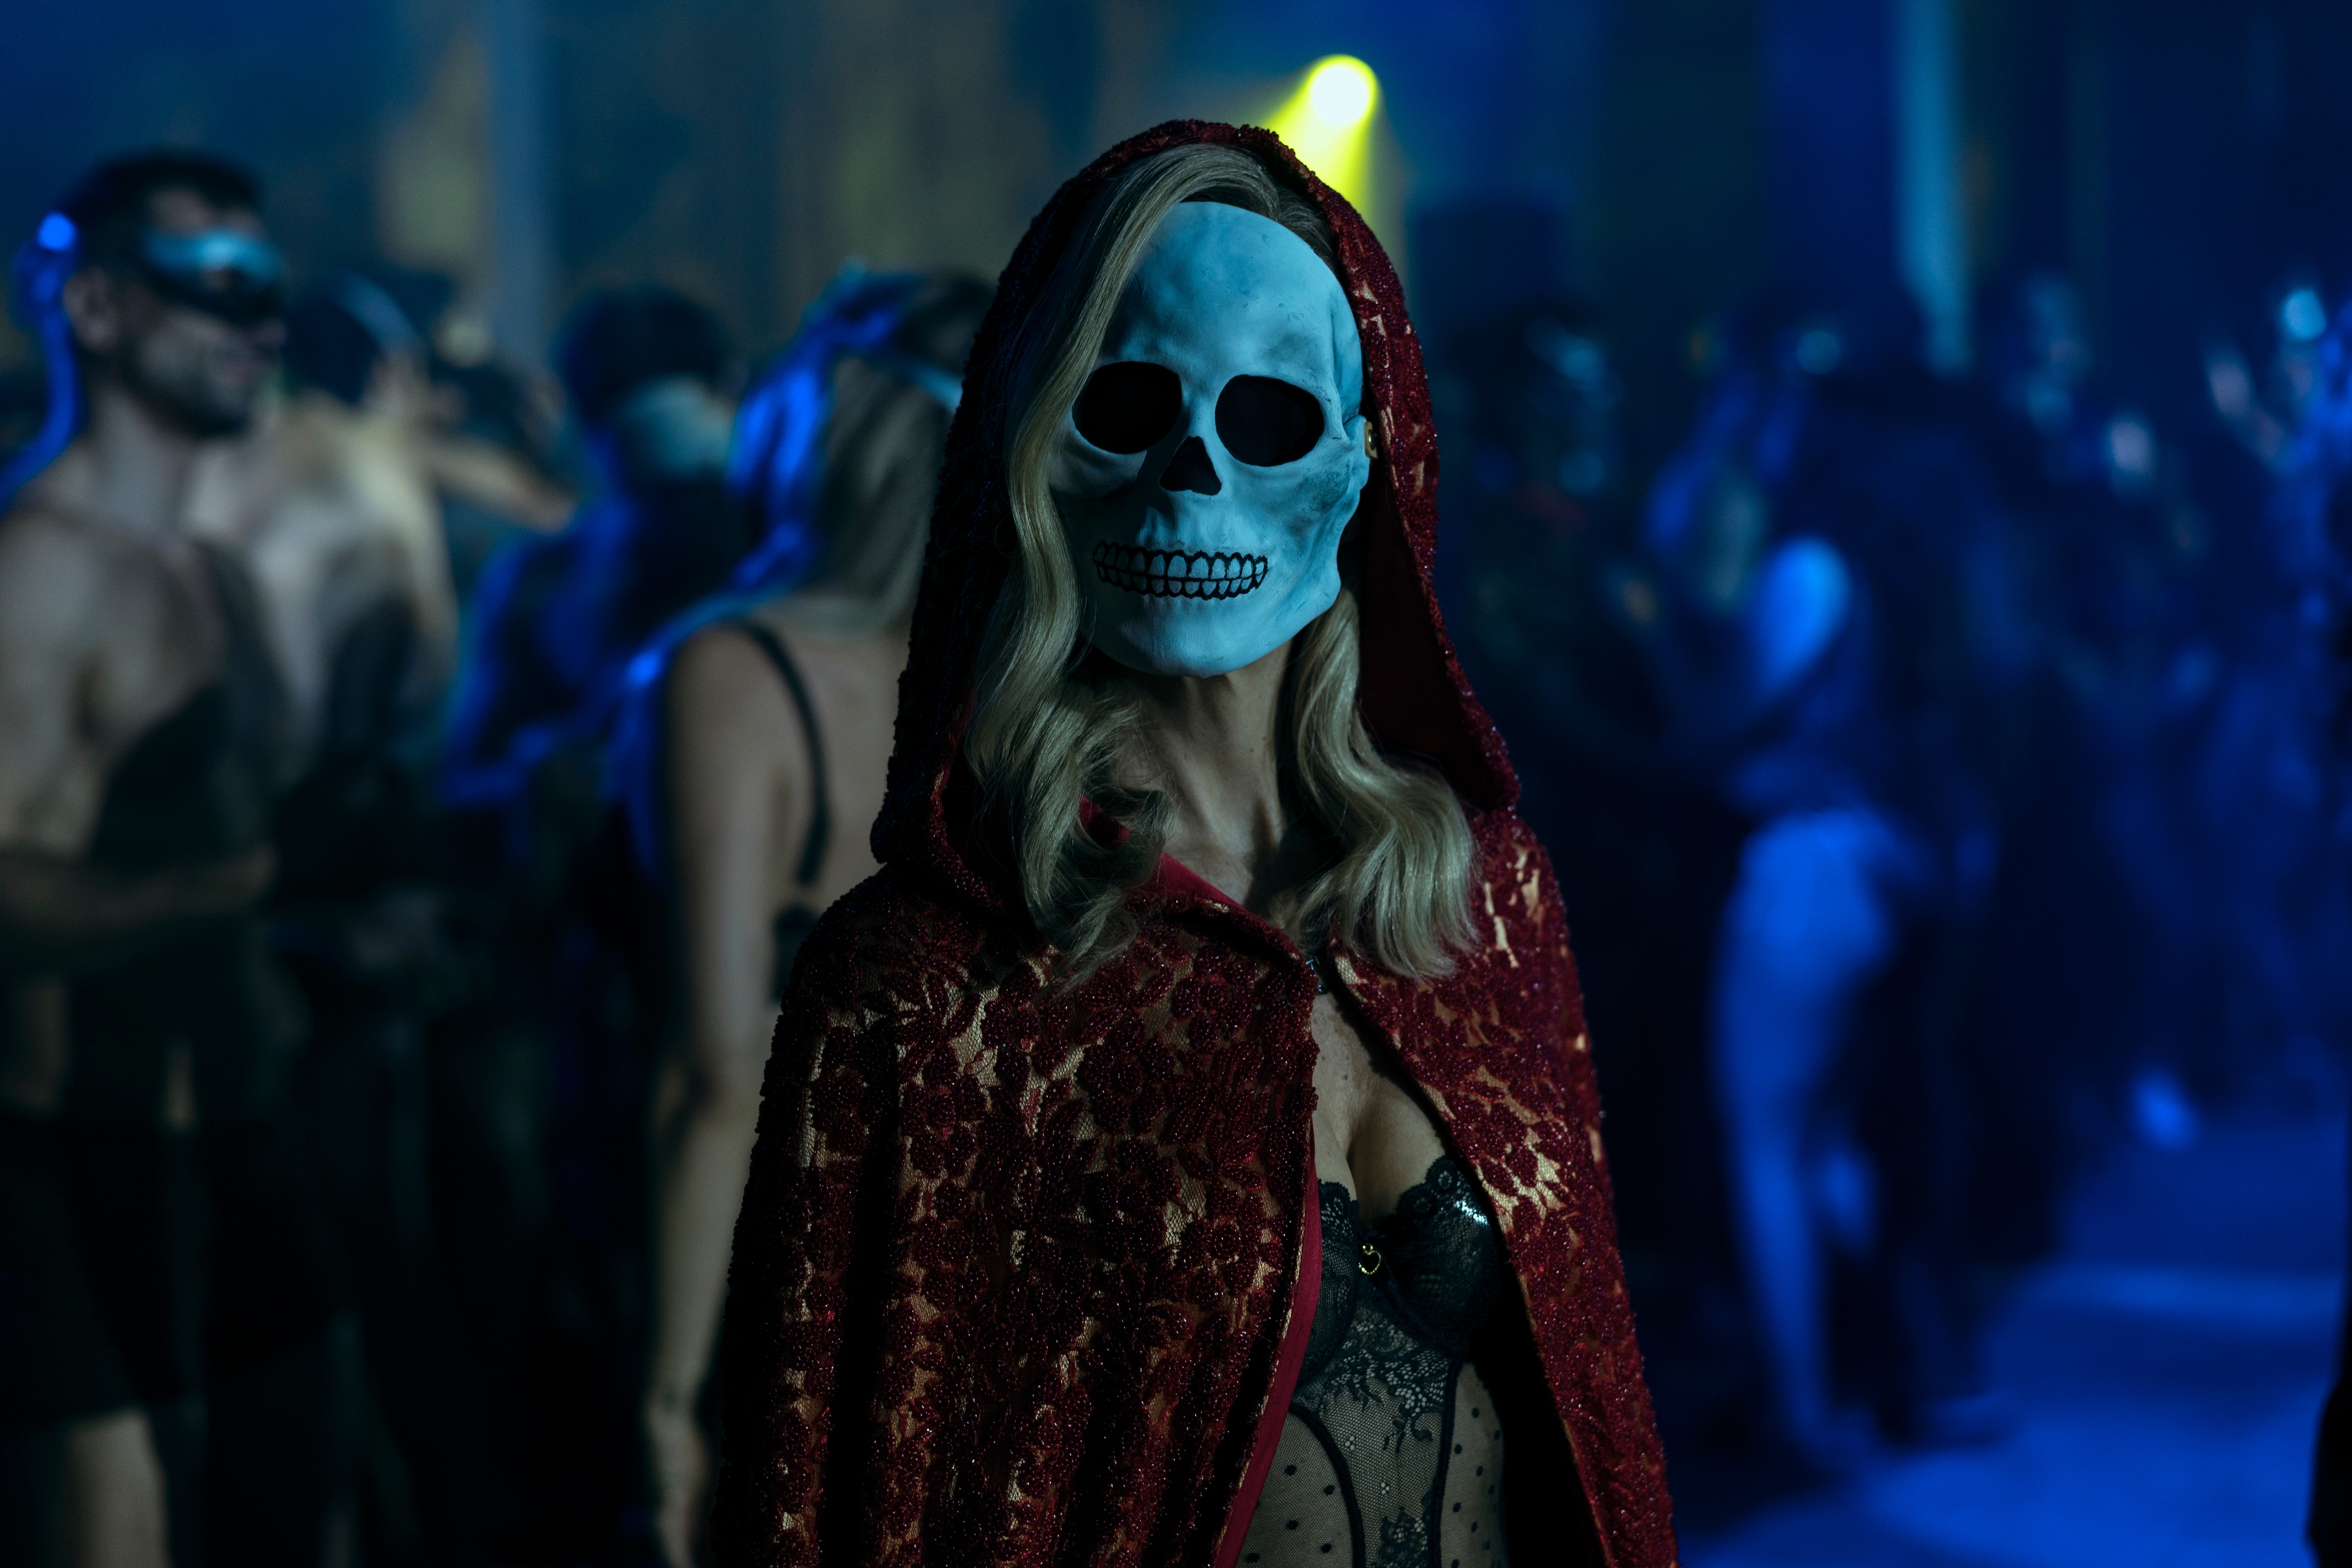 A woman wearing a red, lacy hooded cape, whose actual face is hidden by a skull mask, appears to stare directly at the camera. 